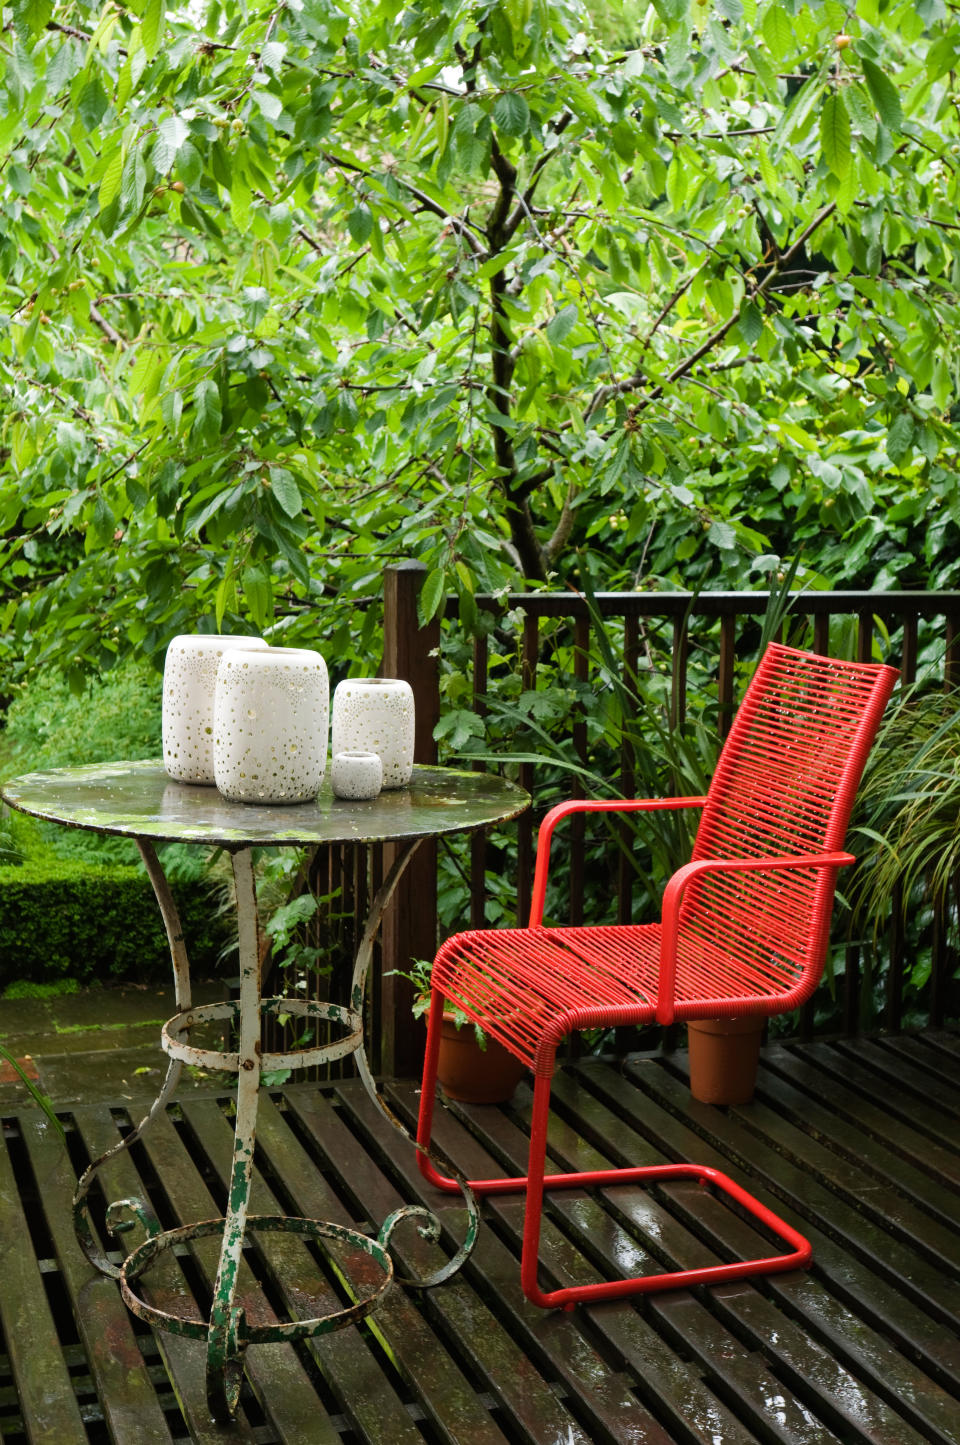 A small veranda with a small glass table and red metal chairs